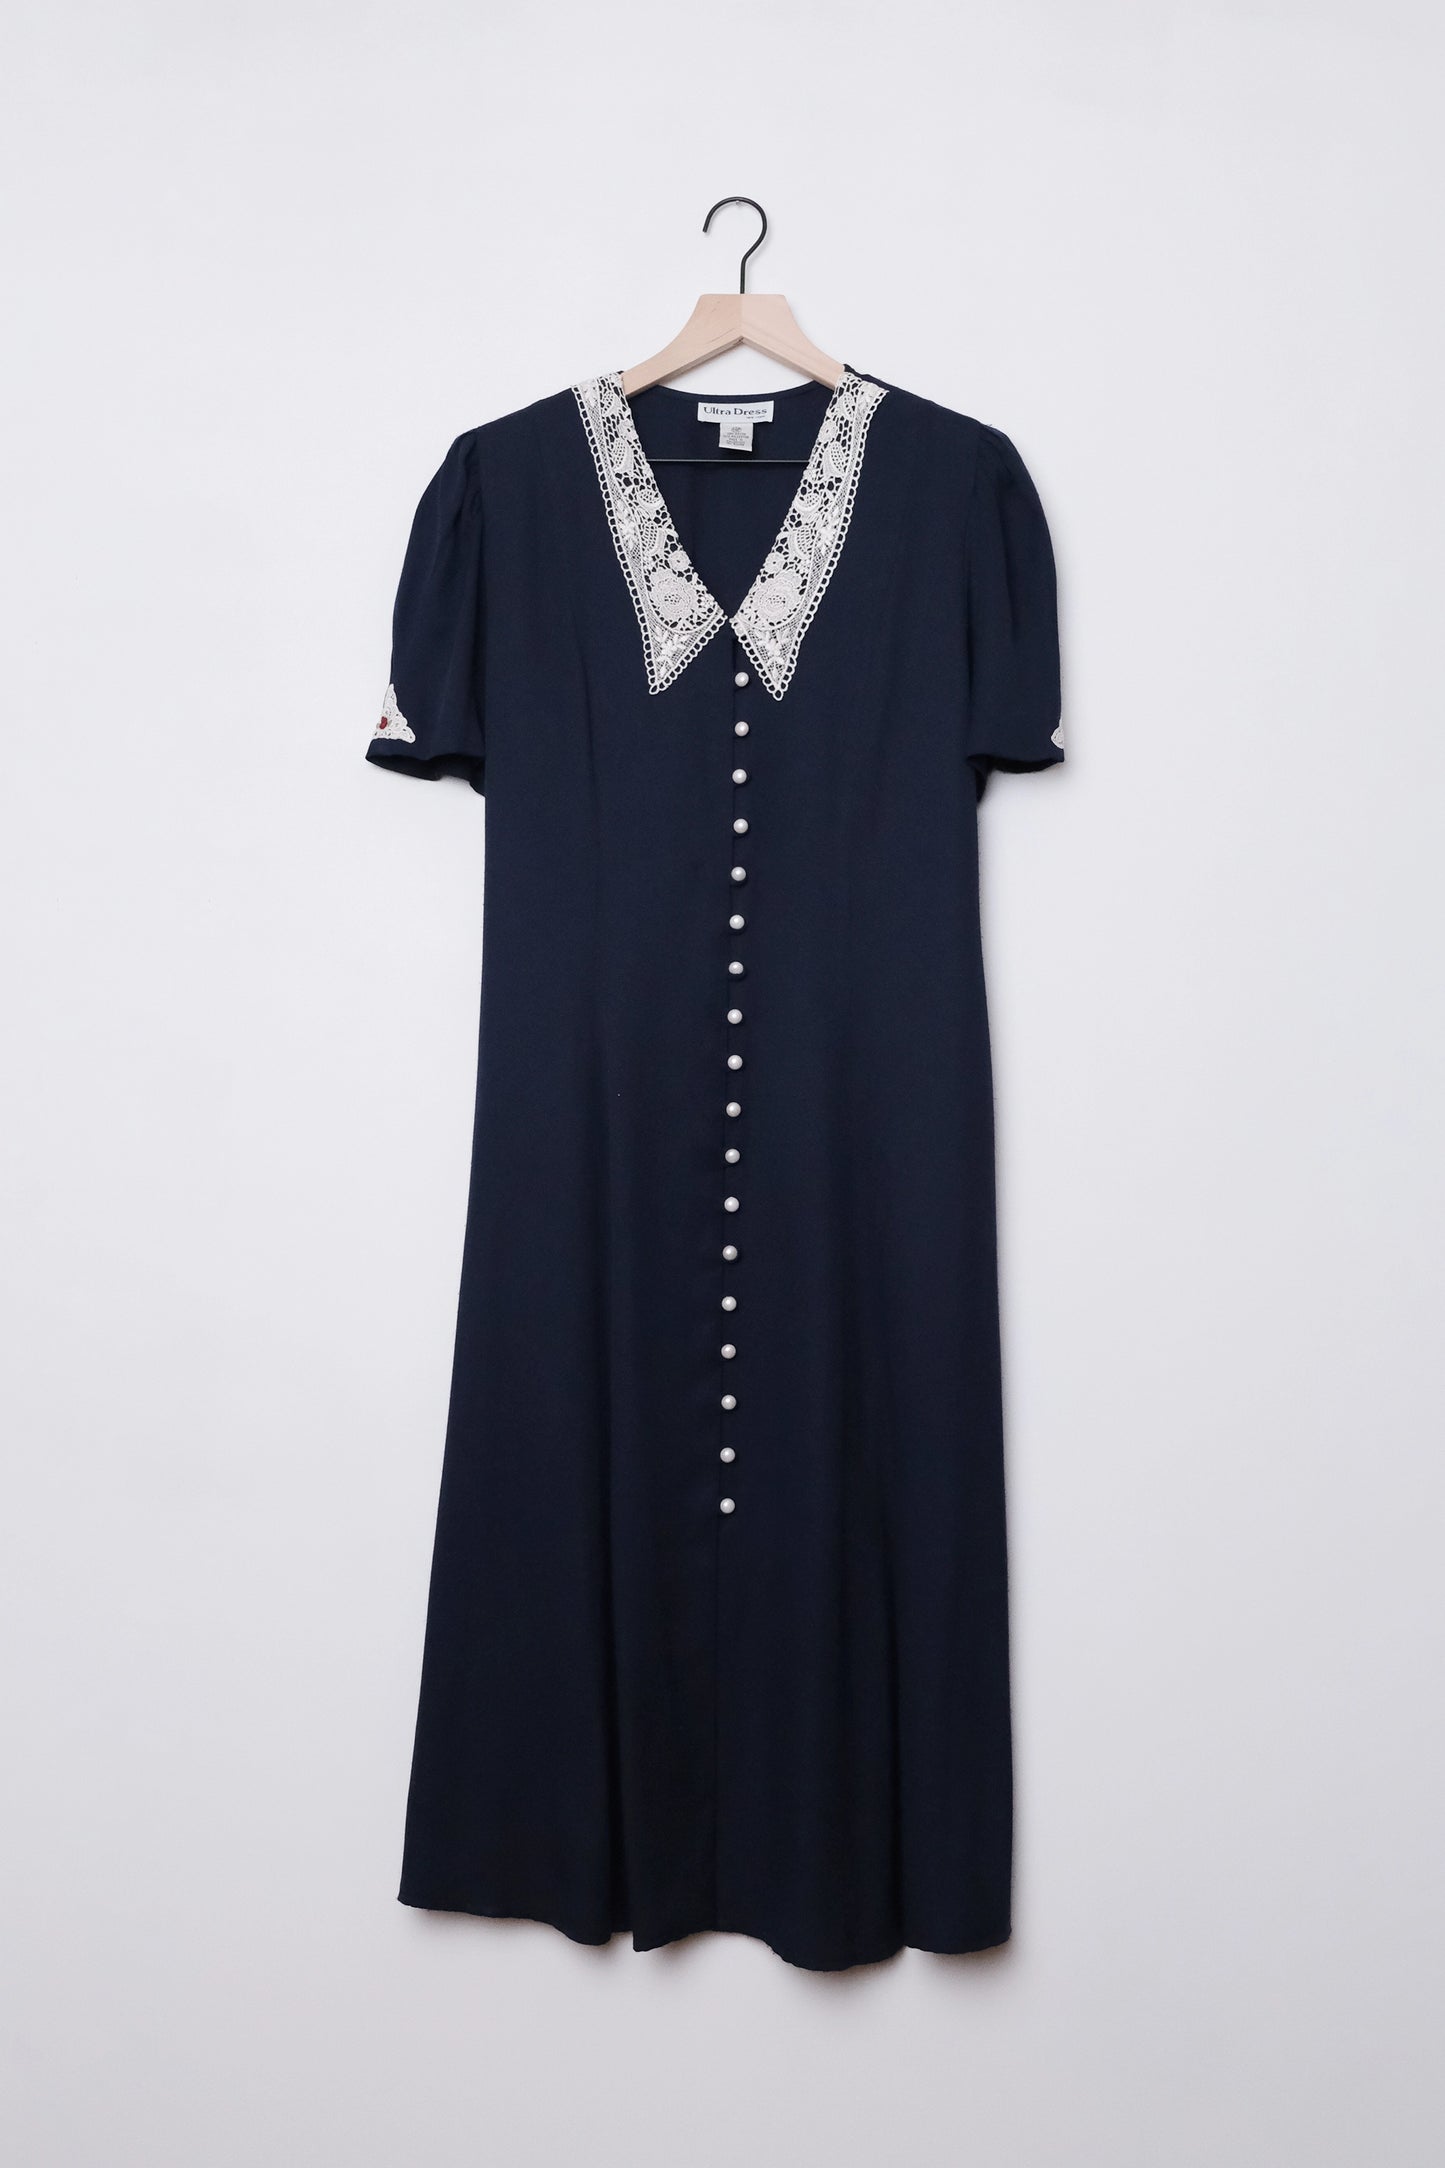 Pearl Button Dress Navy Blue with Lace Sailor Collar 90's US 10